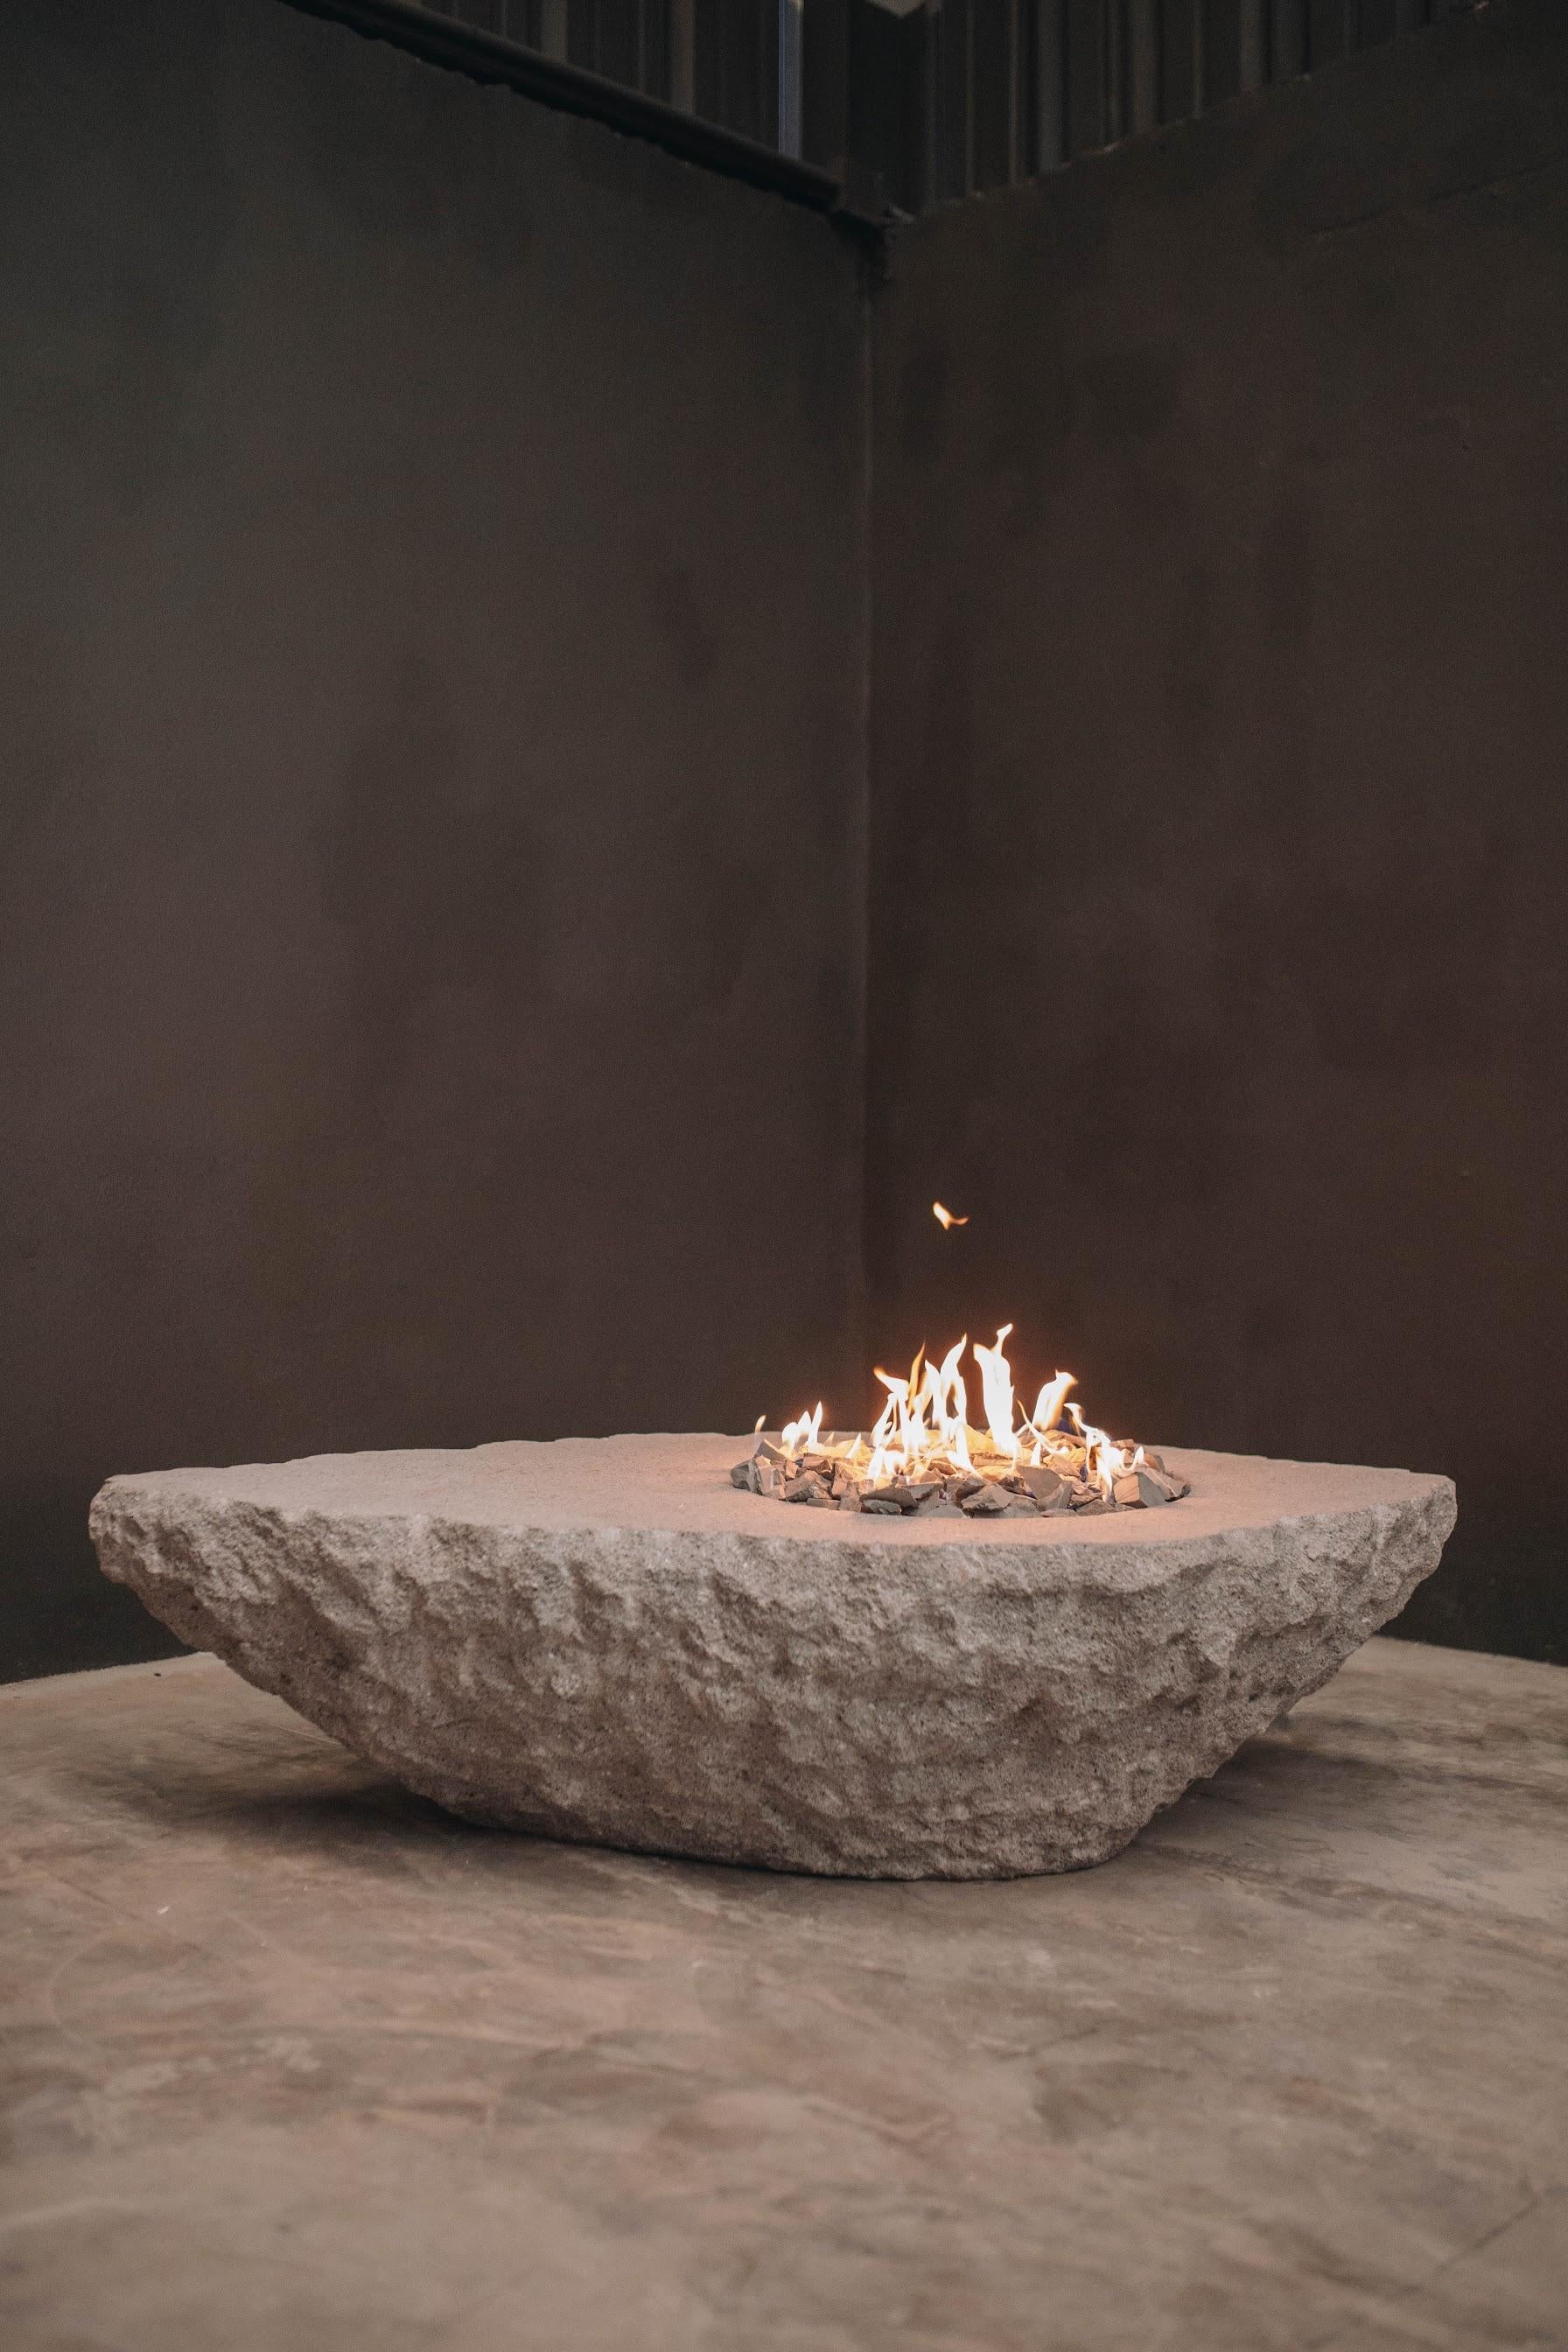 Prometheo Uno fire table by Andres Monnier
Dimensions: D 160 x W 100 x H 40 H cm.
Materials: Grey Quarry stone.

Prometeo fire table is a piece inspired by the myth of Prometheus, of the Greek mythology.
Prometheus was a titan who stole the